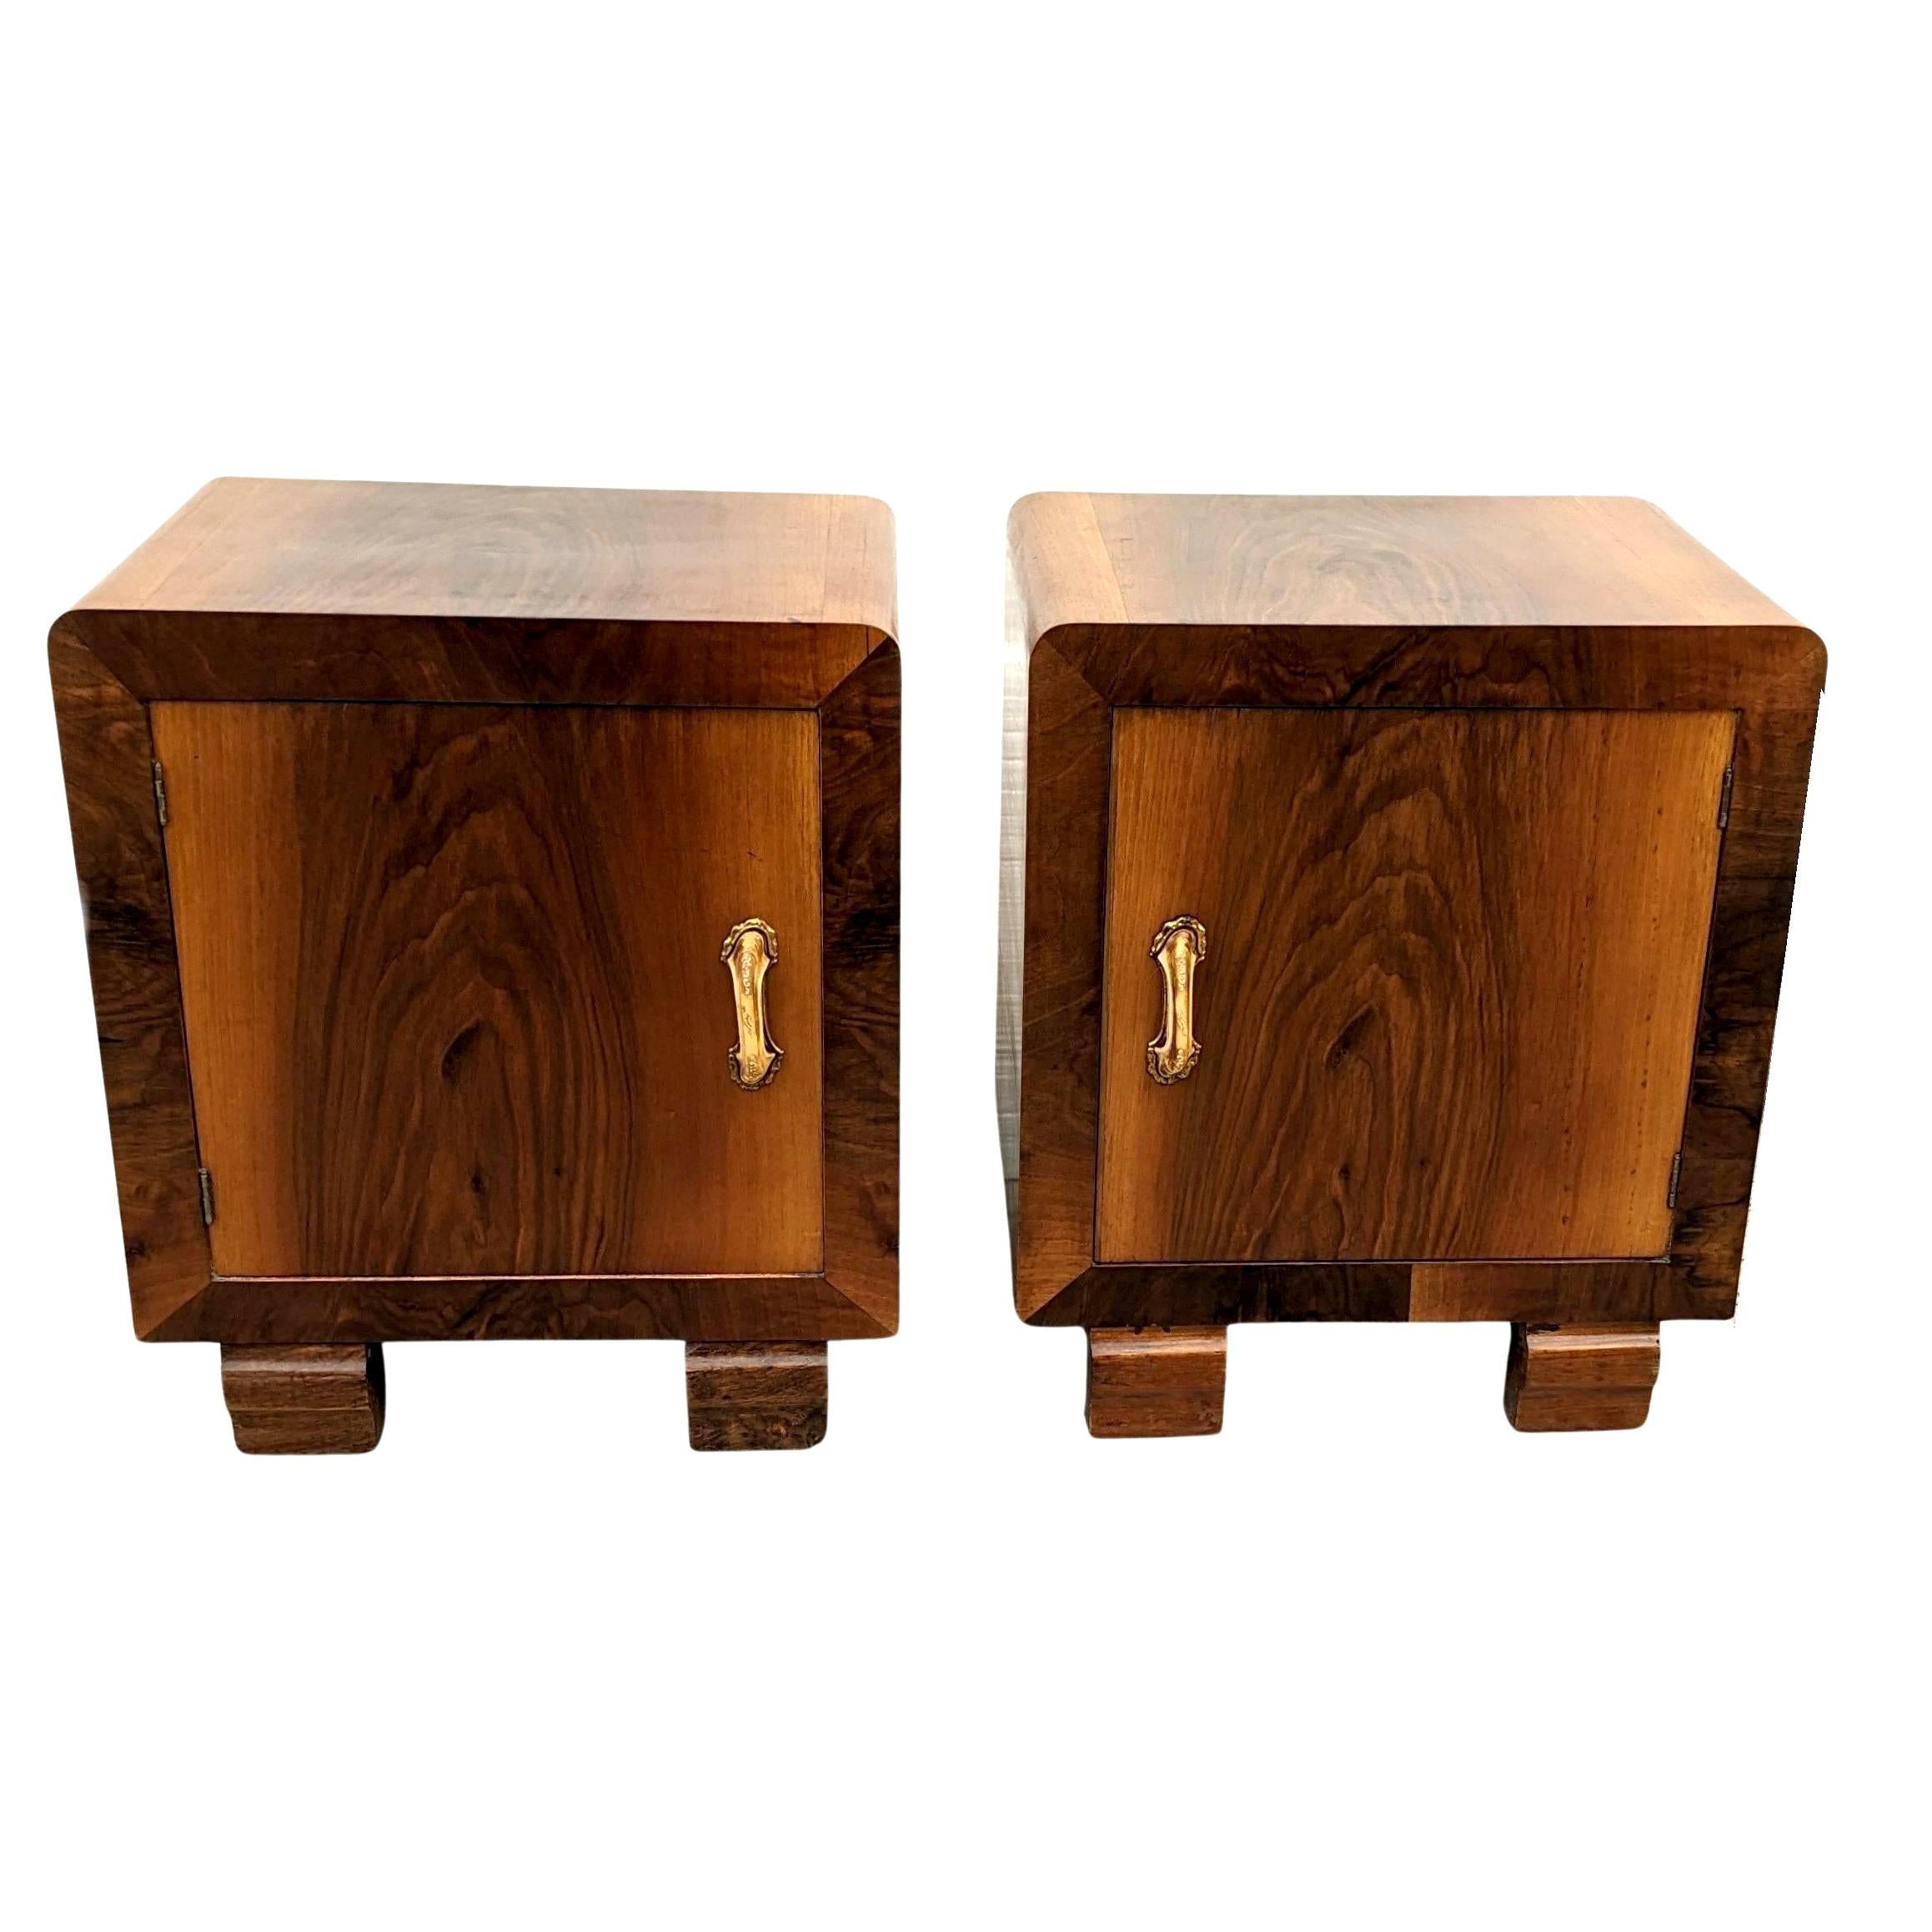 A rare opportunity to acquire high styled and totally original Art Deco bedside tables. Originating from Italy and dating to the early 1930's they fill both the highly desired shape of Art Deco at its best and sort after the luscious veneers of